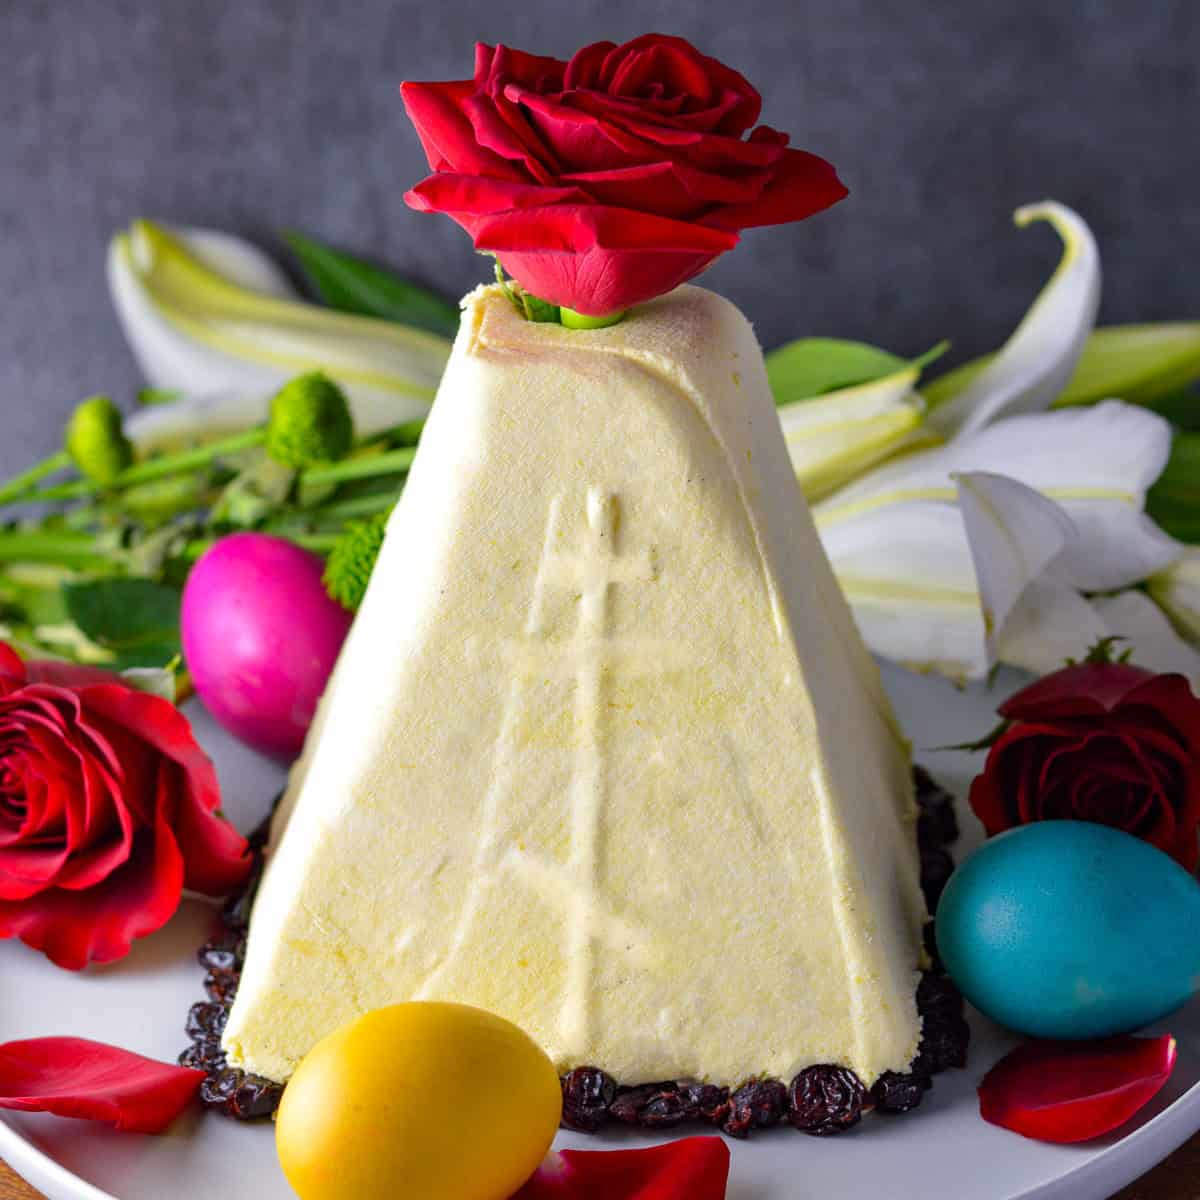 Orthodox Cross on side of paskha with a rose on top, surrounded by colored eggs, red rose and white flower in background